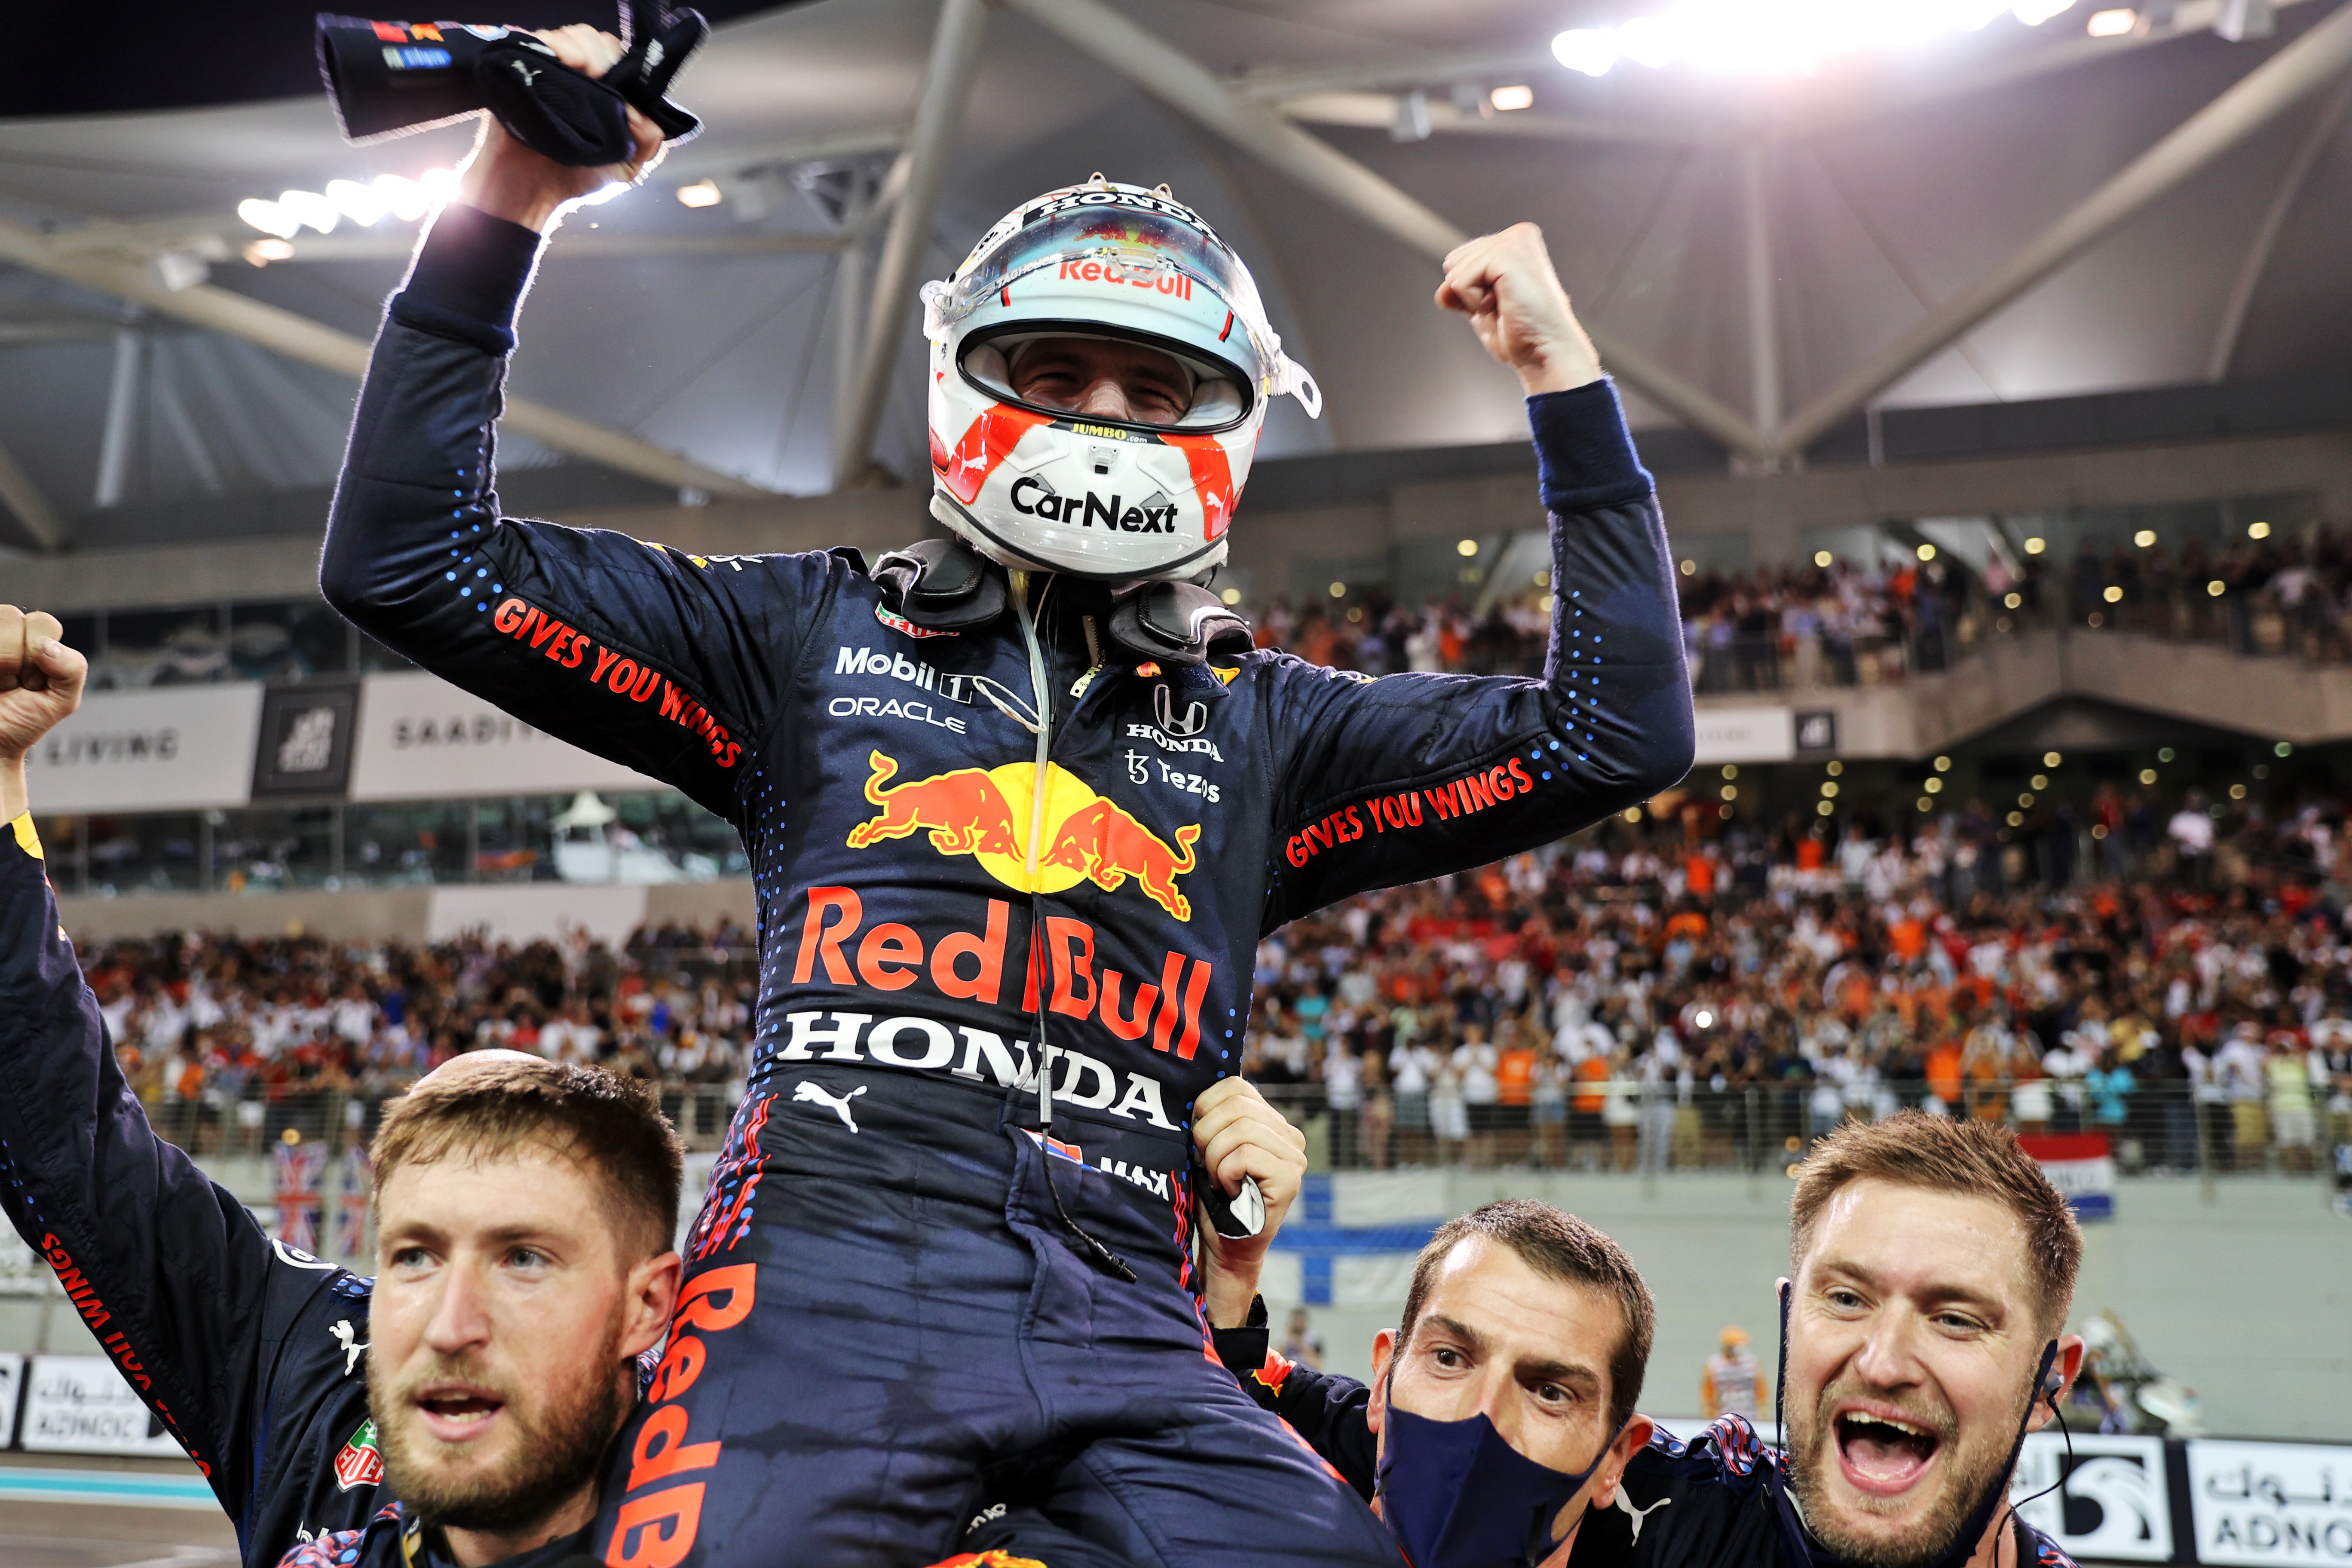 Max Verstappen won his first Formula One title on Sunday in controversial circumstances